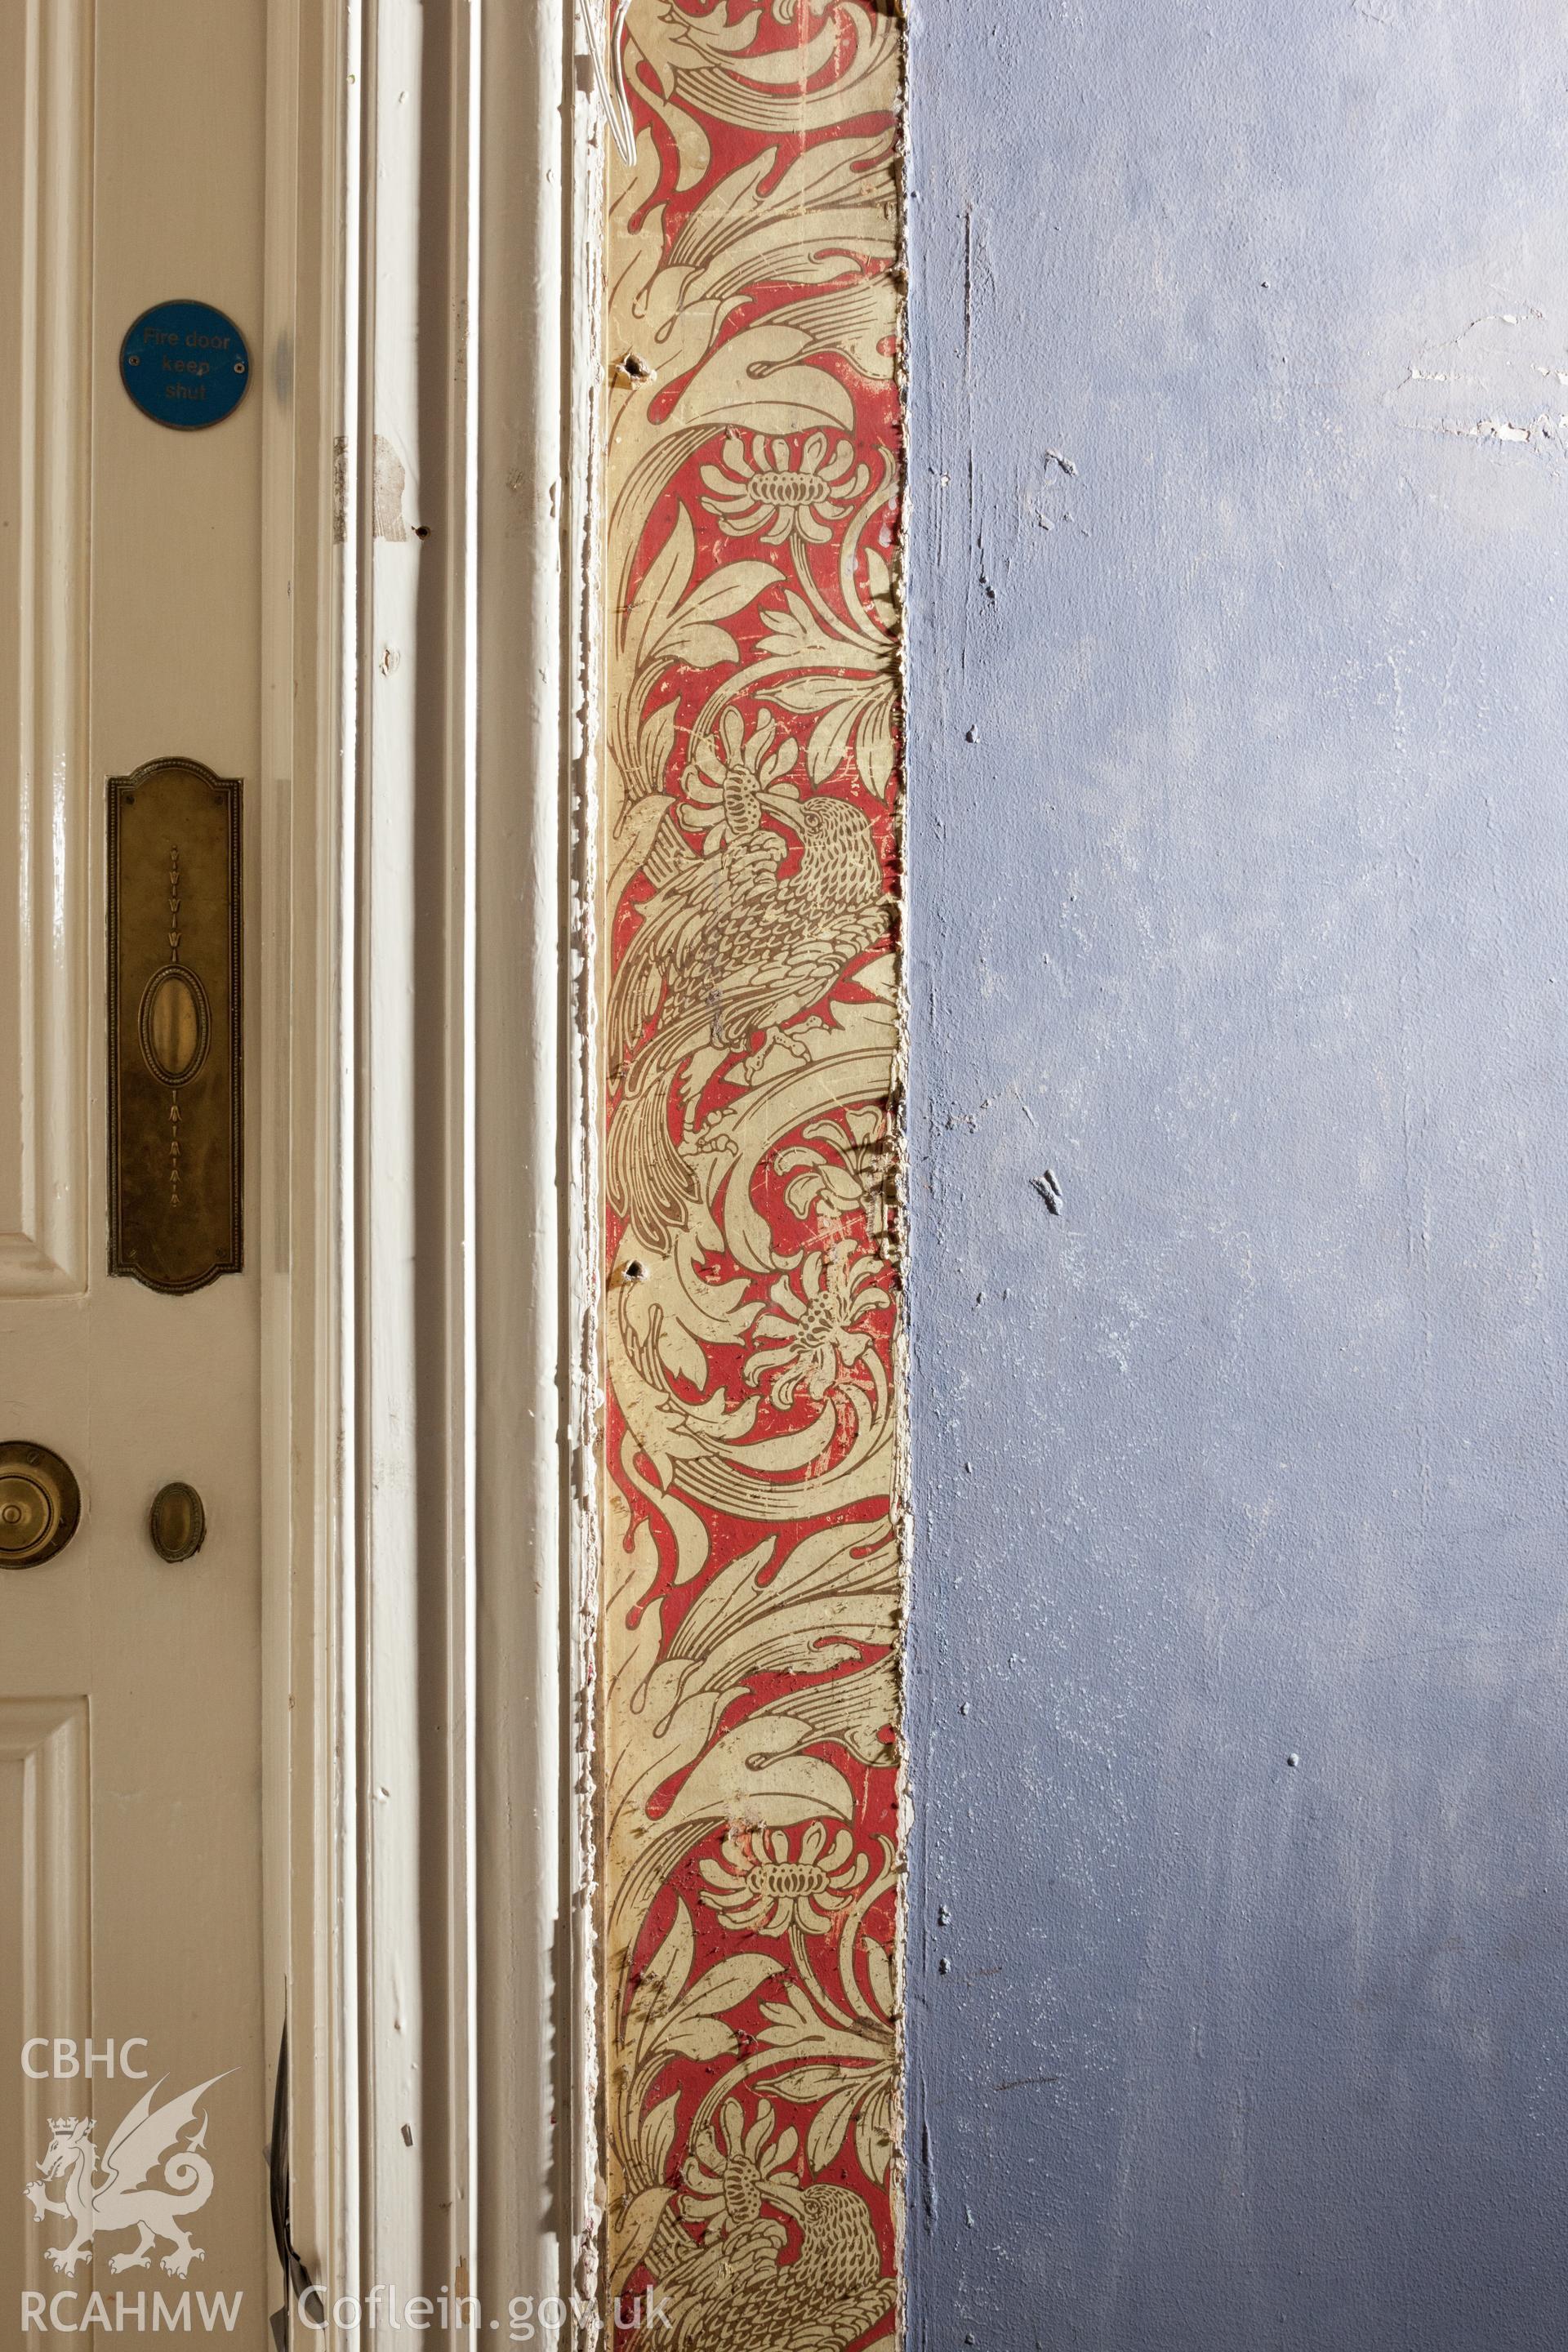 Early wallpaper uncovered by removal of door frame